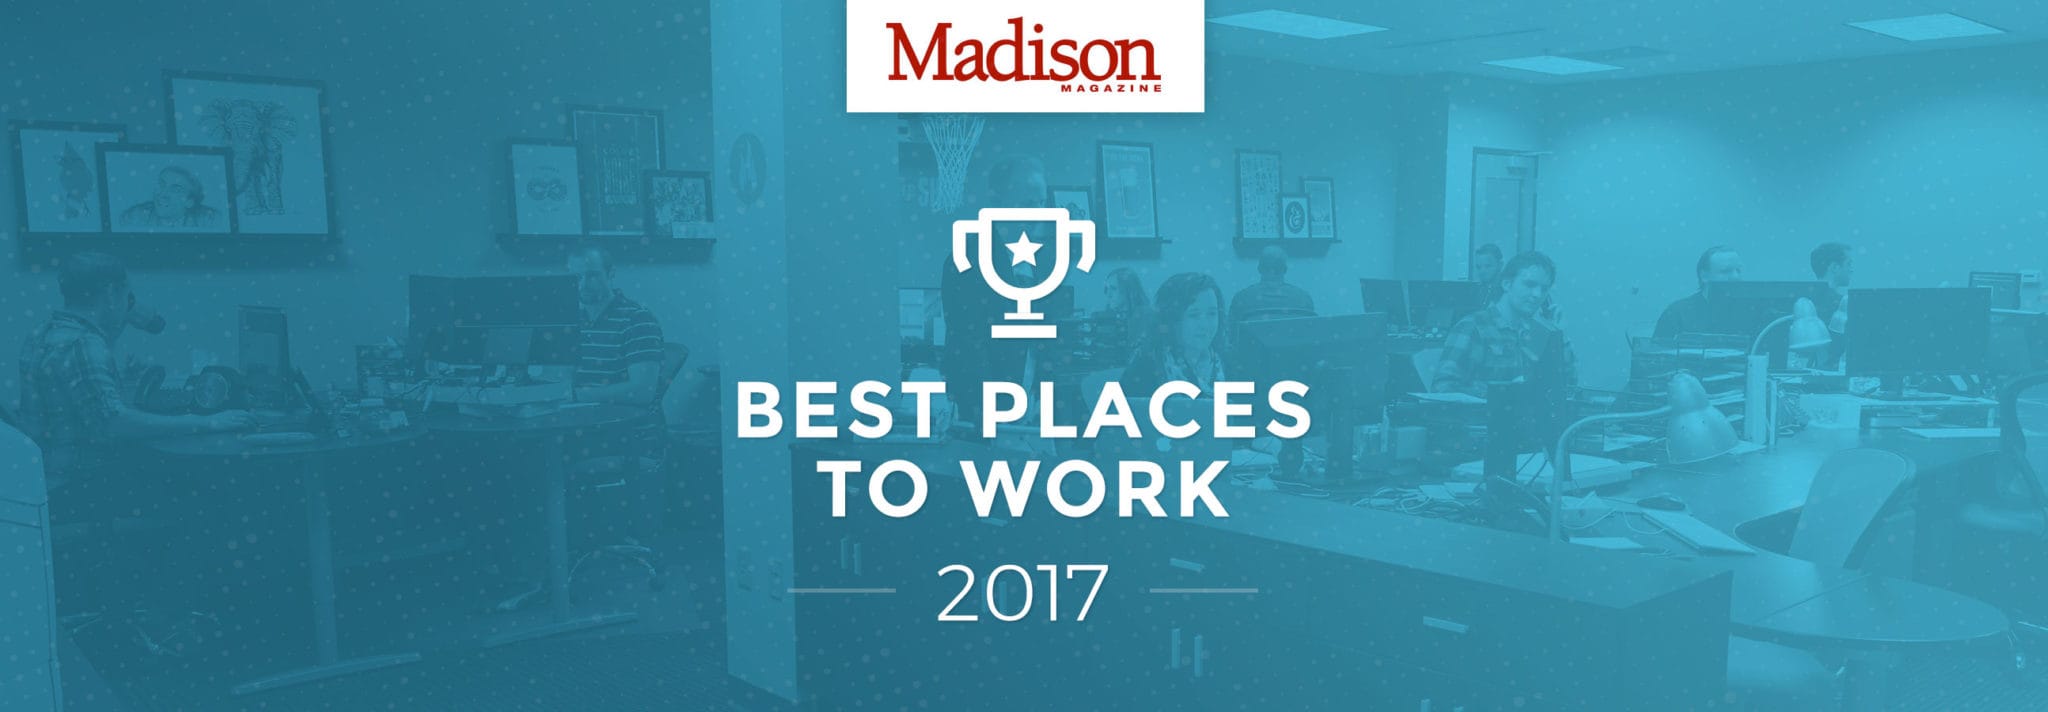 2017 Best Places to Work Madison!